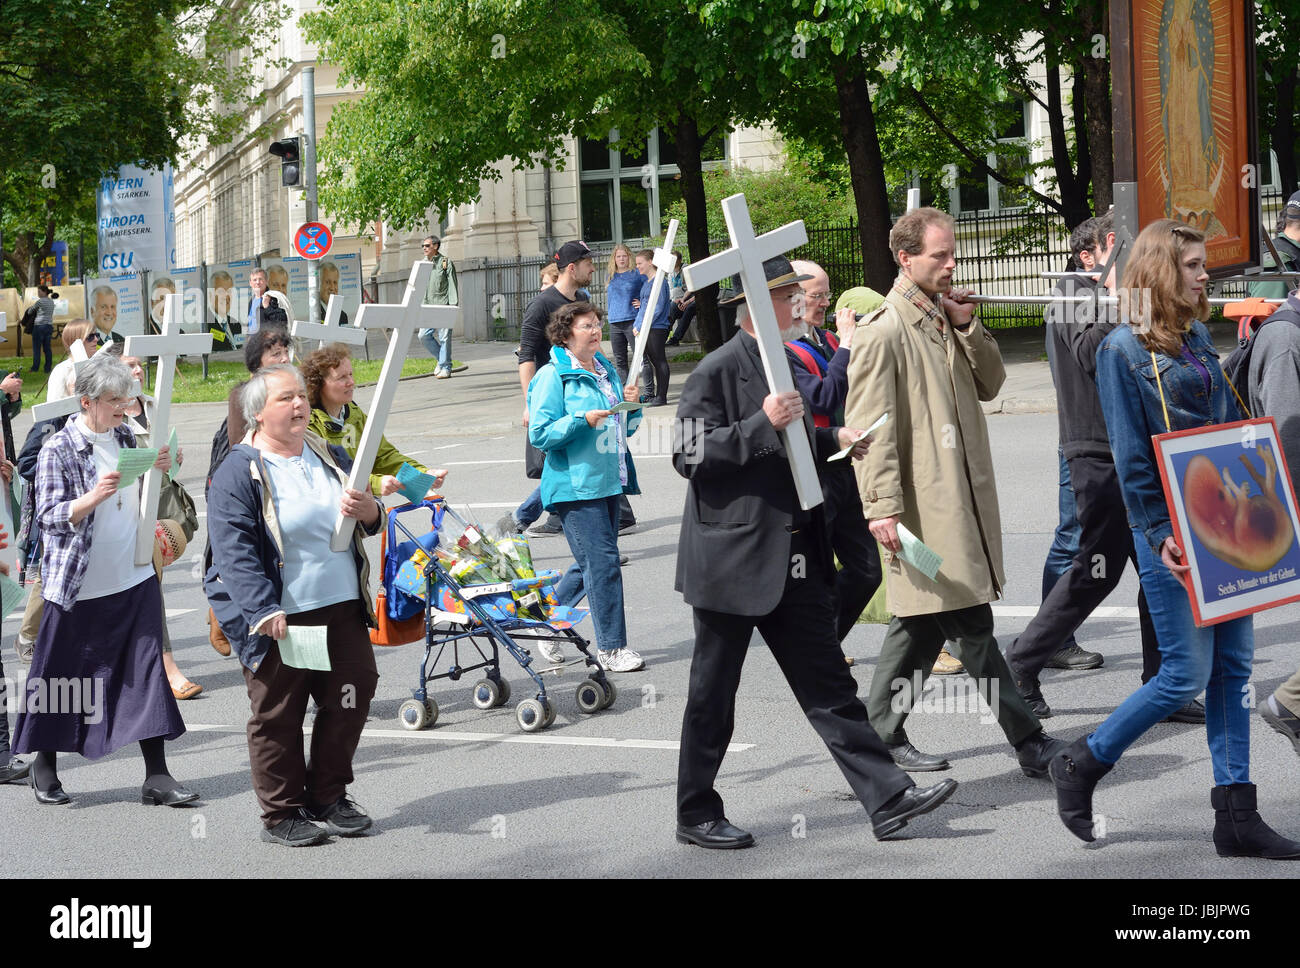 MUNICH, GERMANY – MAY 10, 2014:  Anti-Abortion Demonstration with participants carrying Christian Crosses and banners.  Hundreds protested peacefully in Munich. Stock Photo